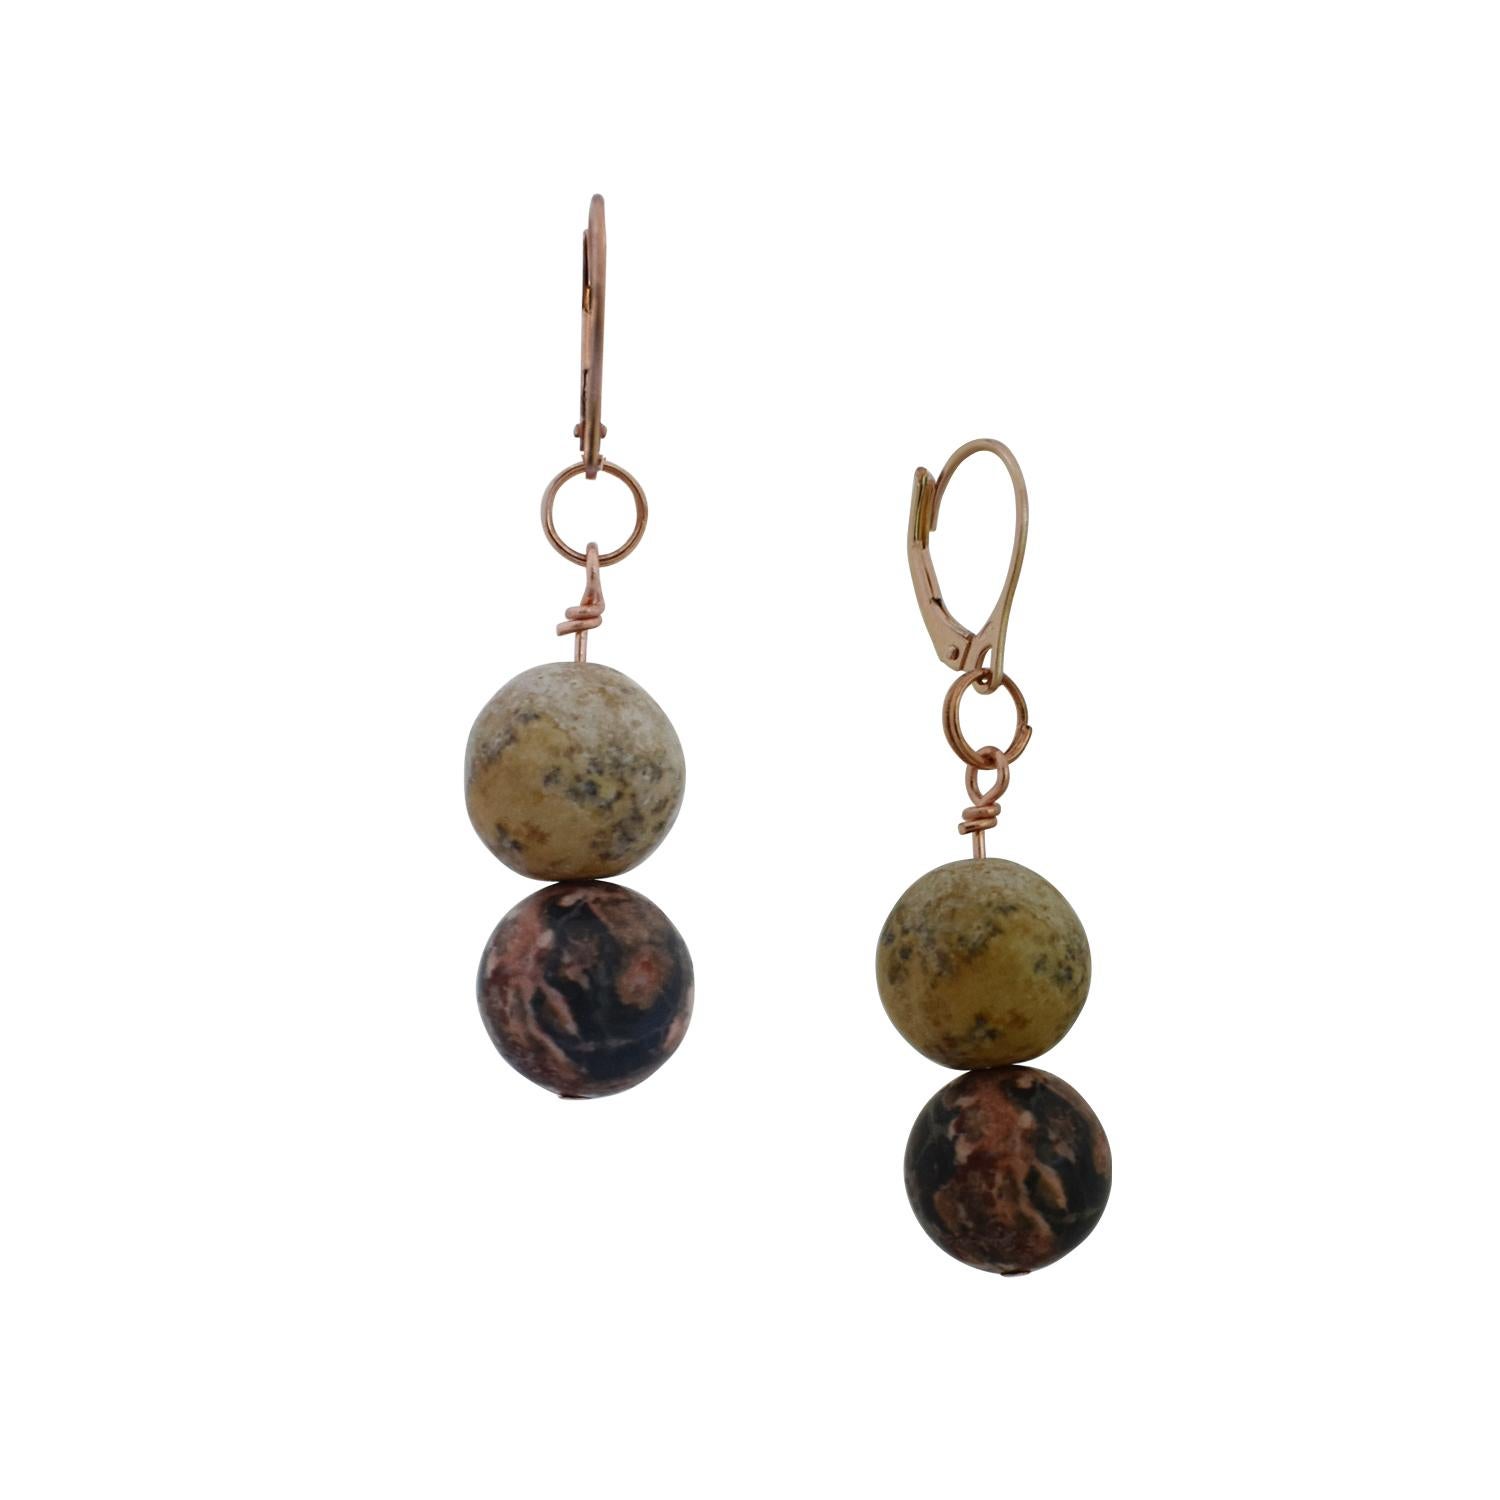 Made with 2 unusual gemstones picture jasper and leopard skin jasper. They look great intentionally mismatched with my other earrings.

*Gemstones: Jasper
*Approx. Earring Weight: 9g

*Metal: 9K Red Gold

These are made to order. 

These earrings